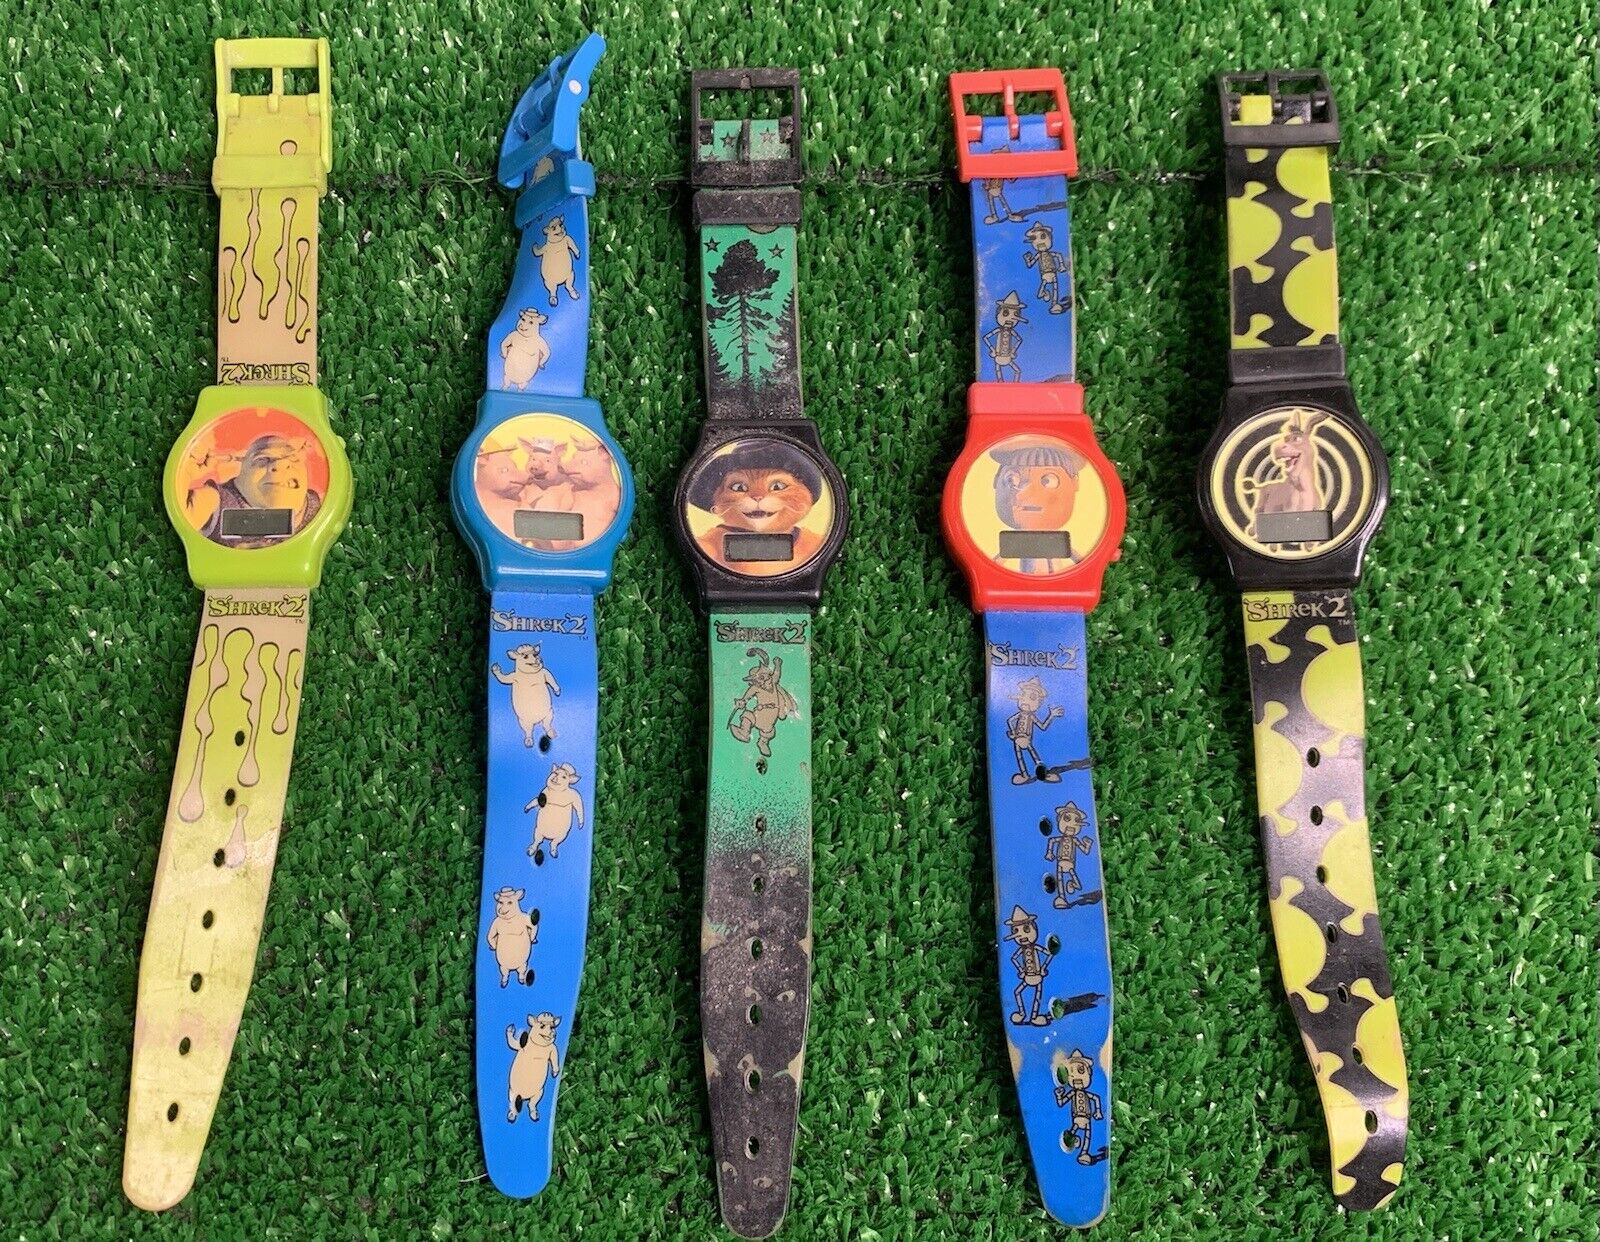 shrek 2 general mills watch collection of 5